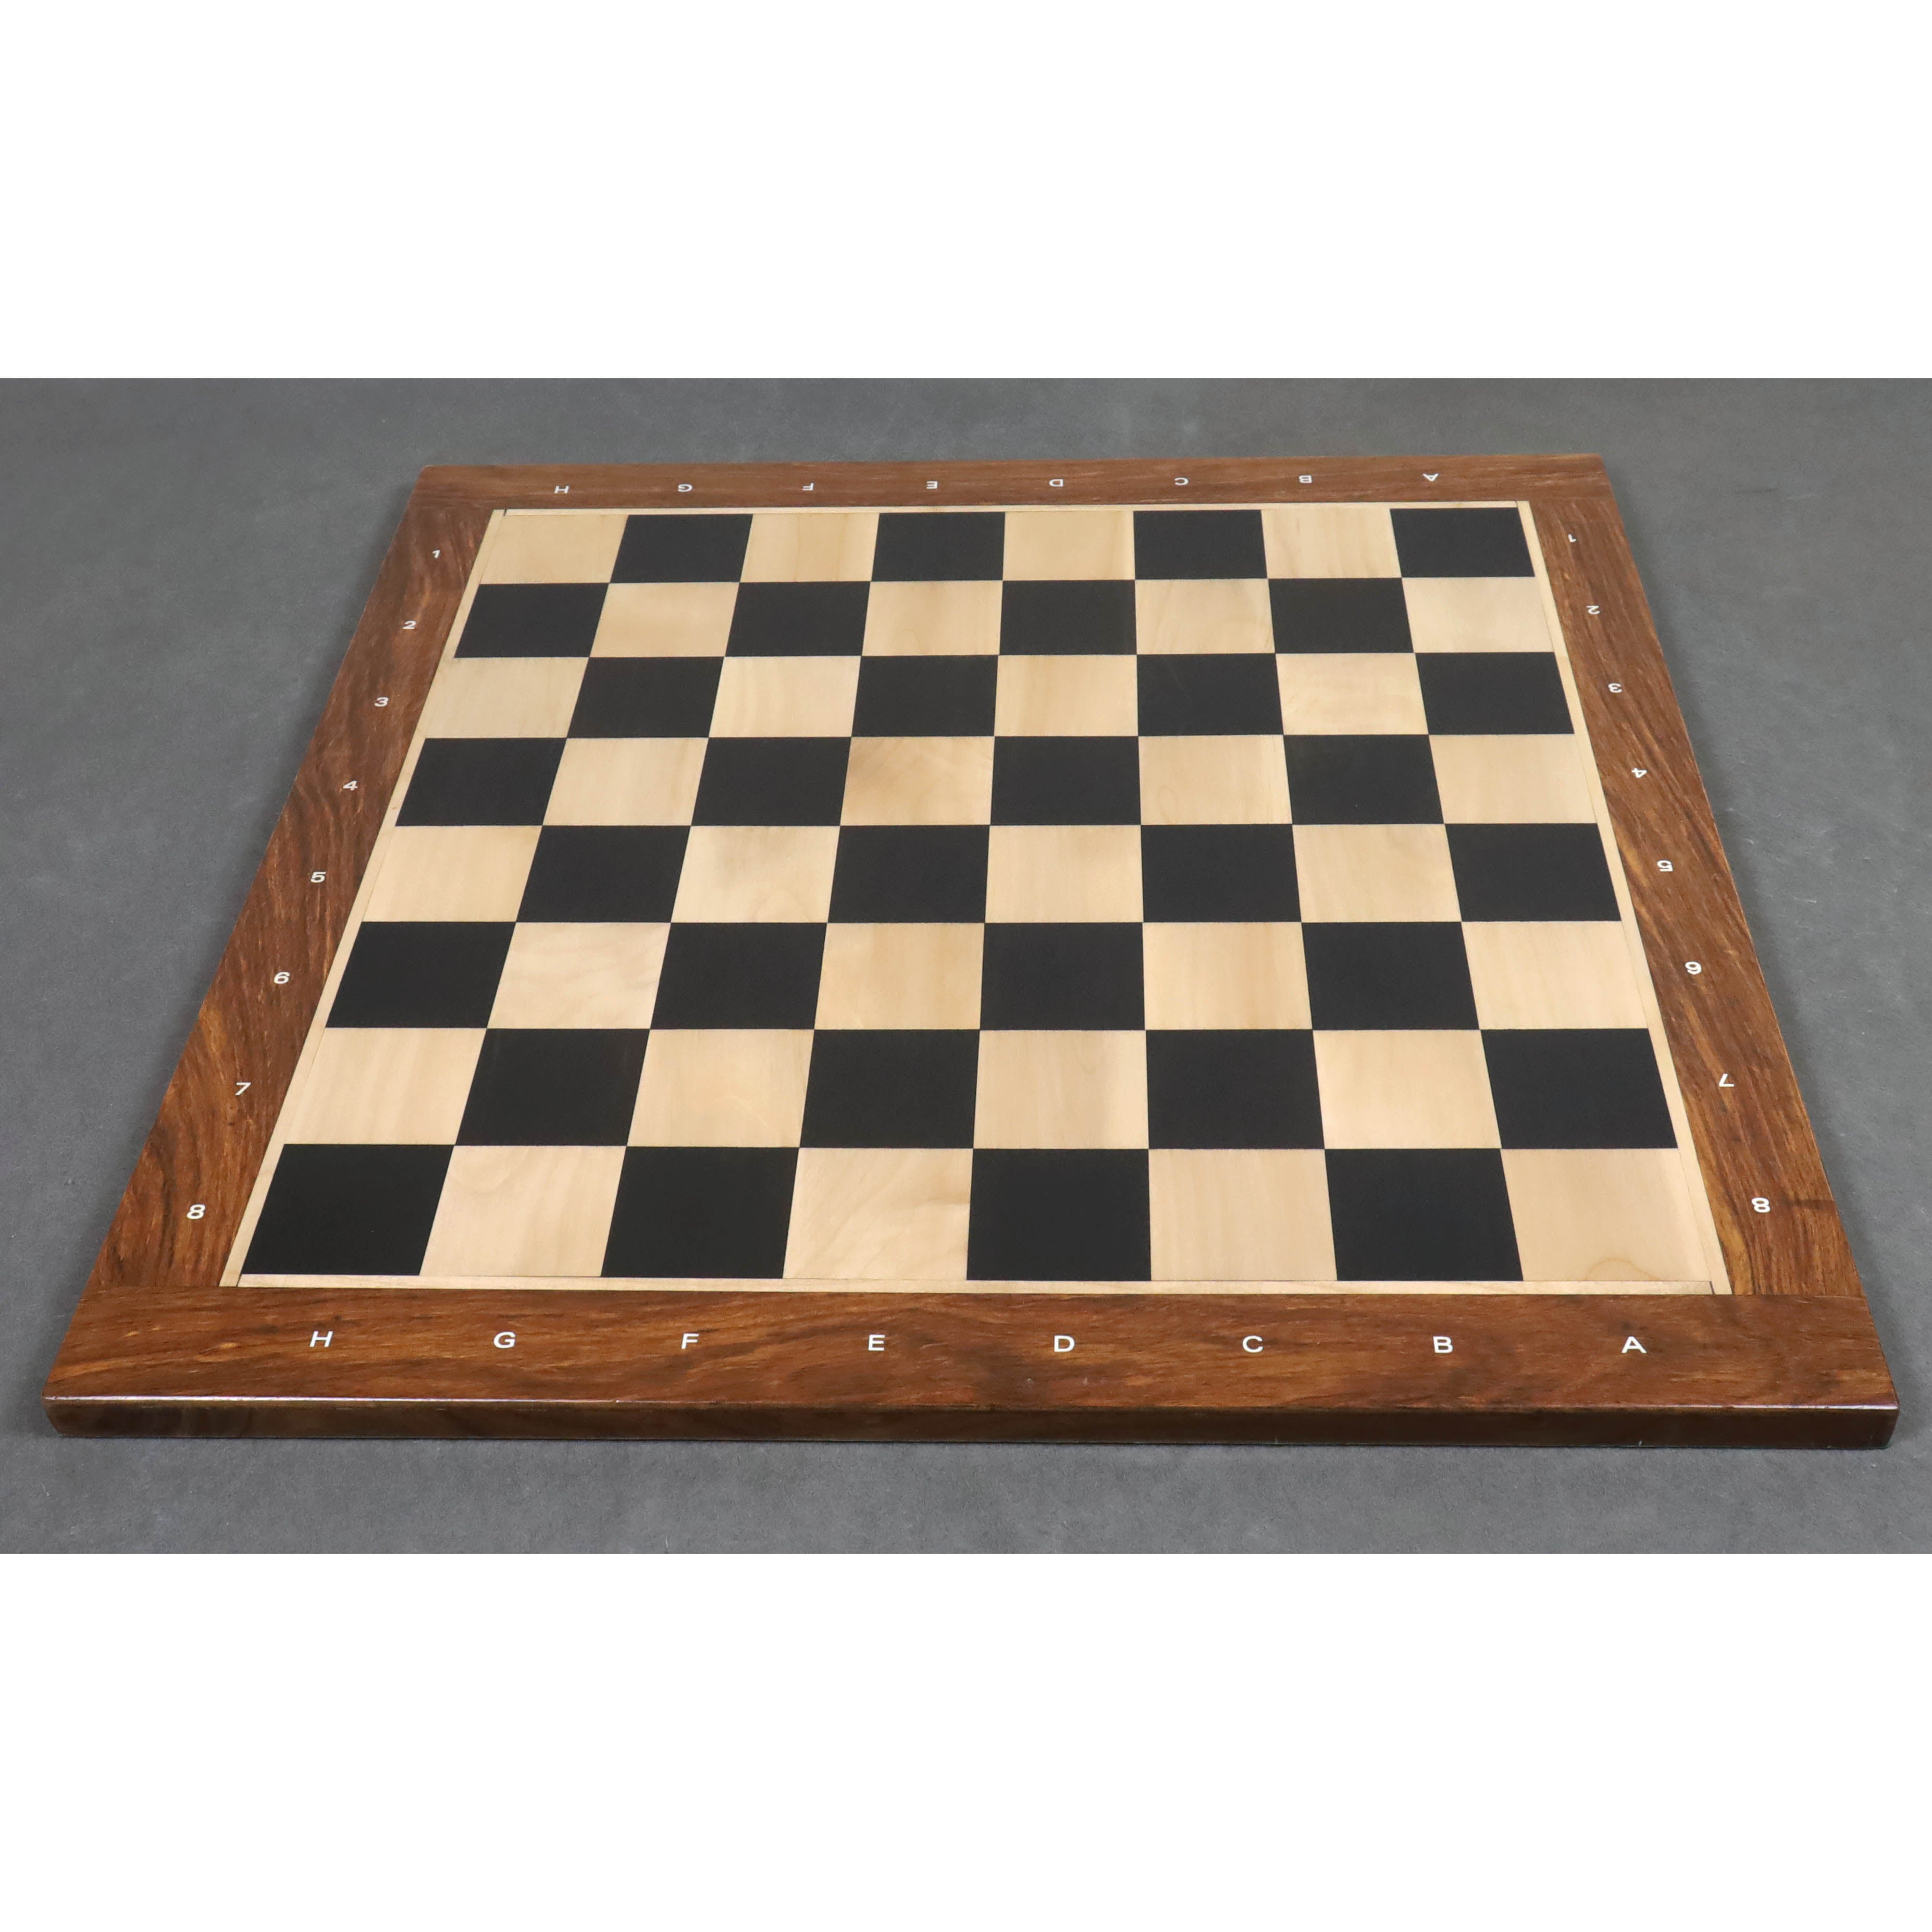 Storage Box for Chess Pieces - Large Solid Ebony & Maple Wood Chessboard 